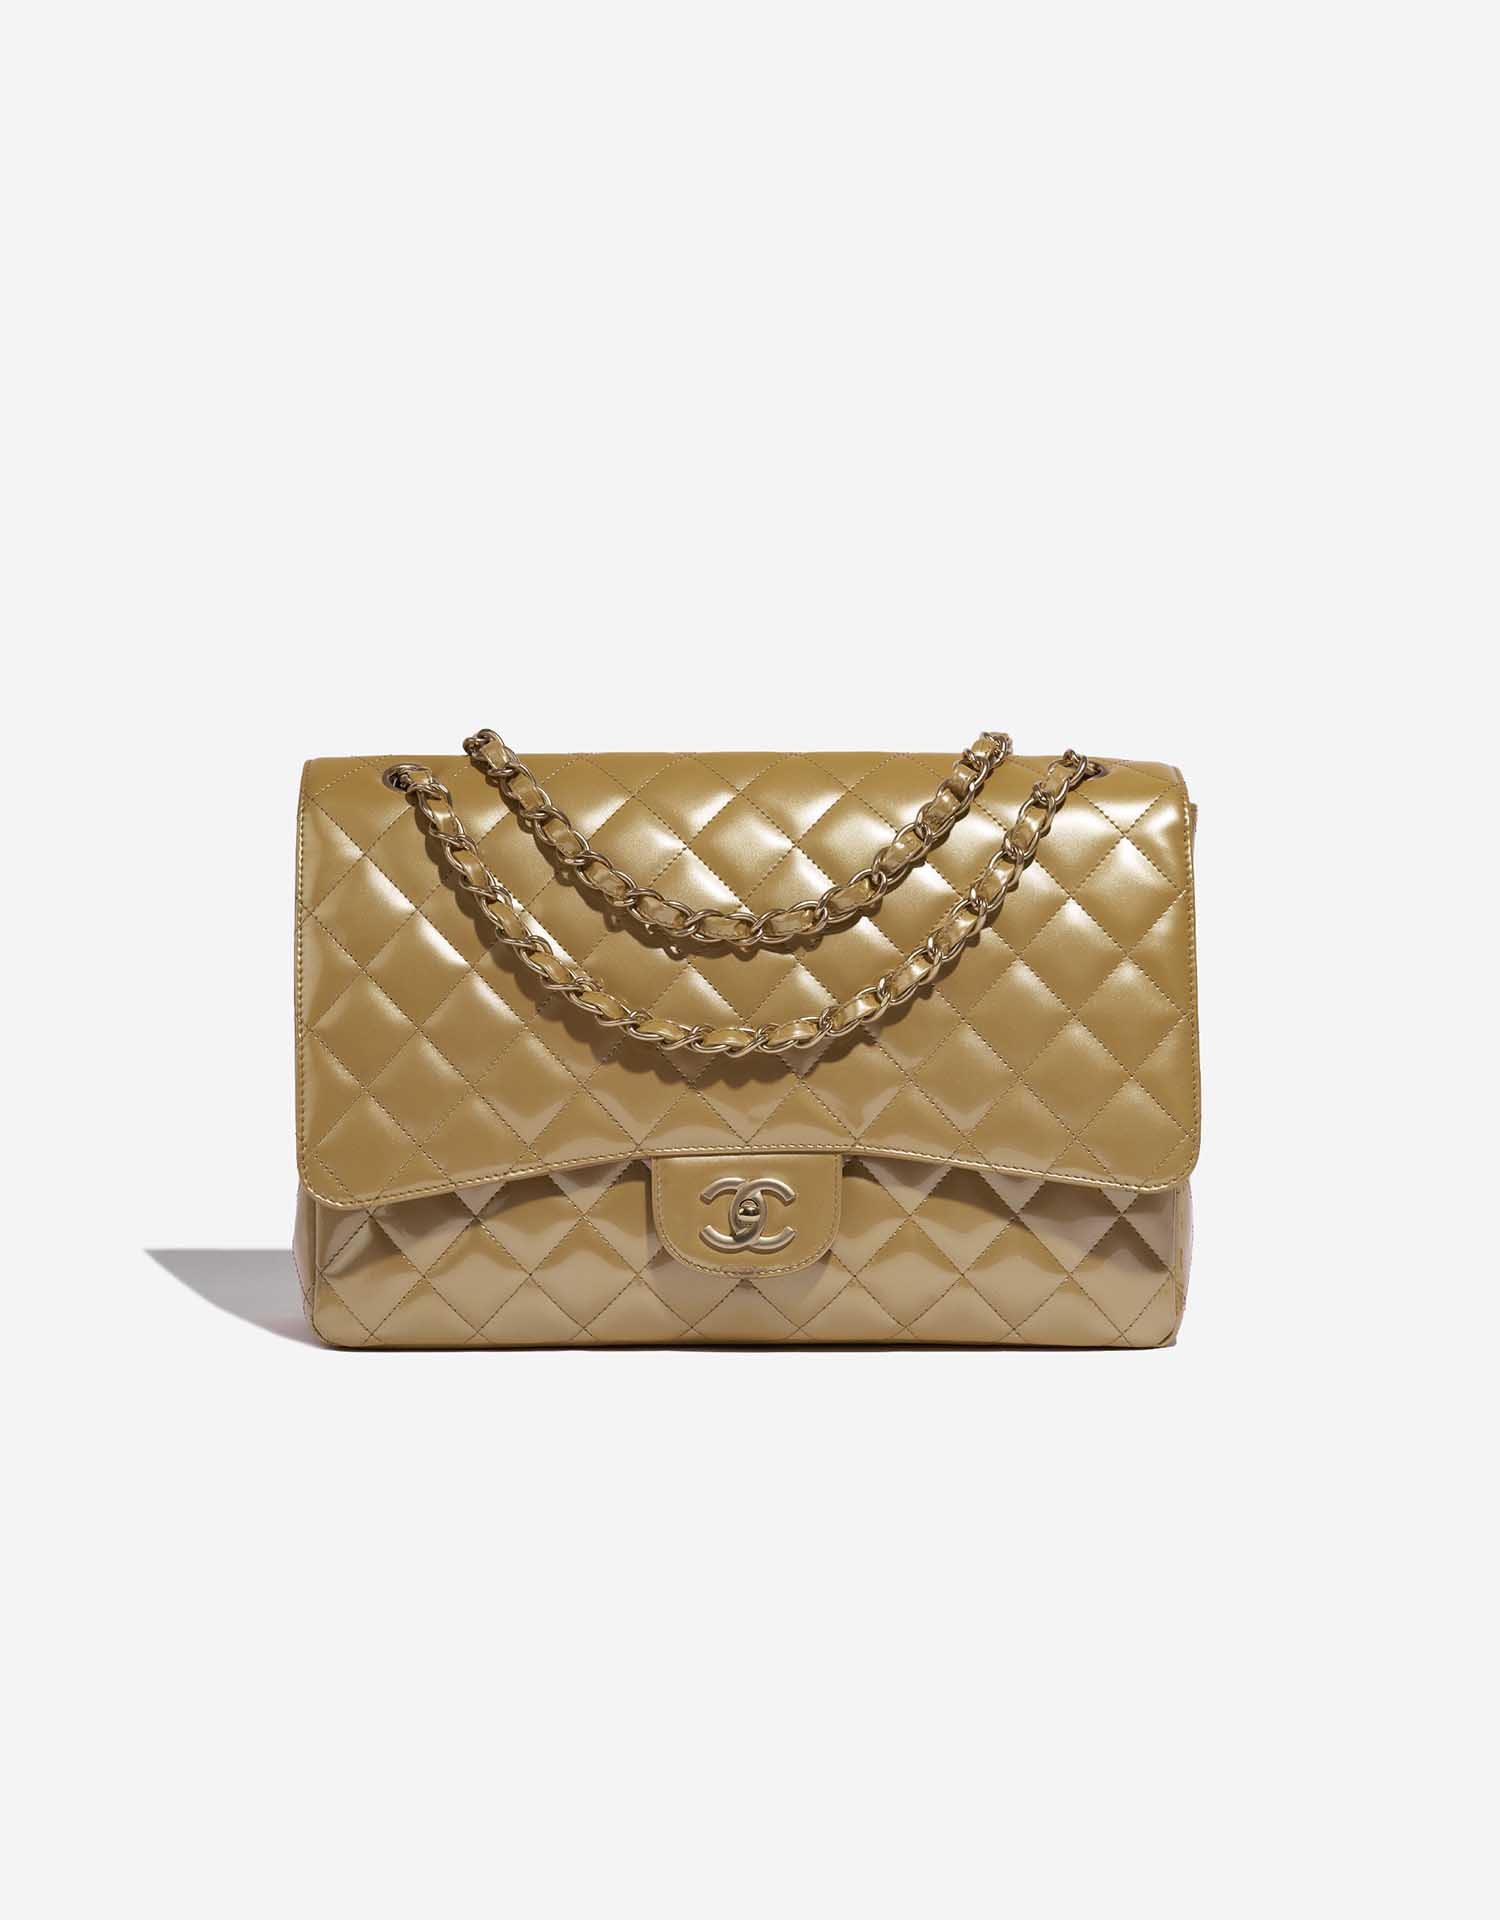 Chanel Timeless Maxi Patent Leather Beige | SACLÀB